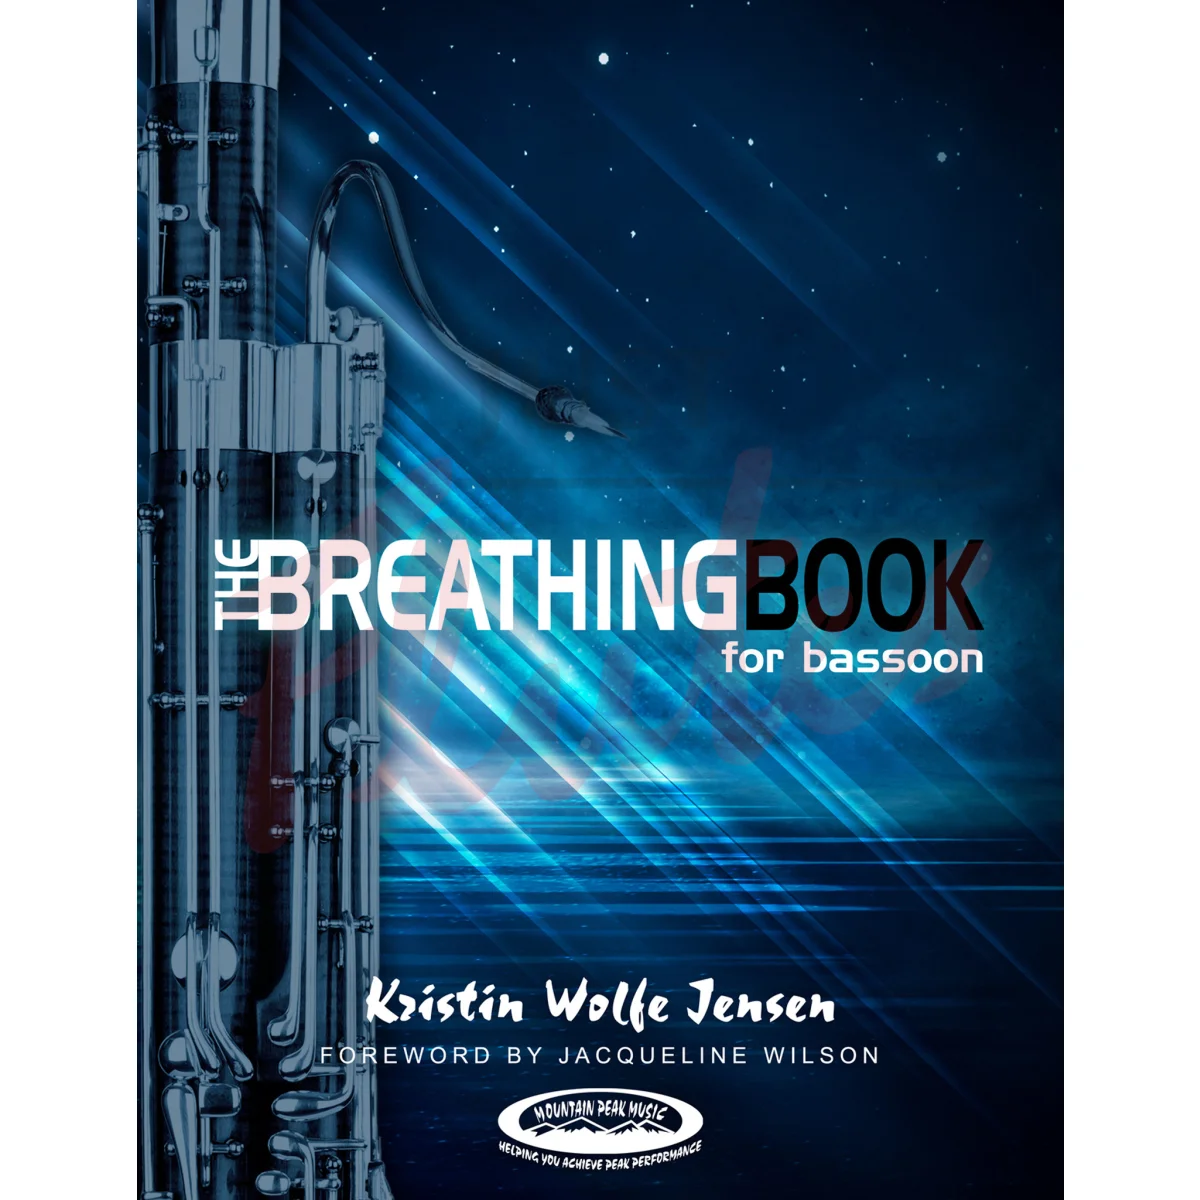 The Breathing Book for Bassoon